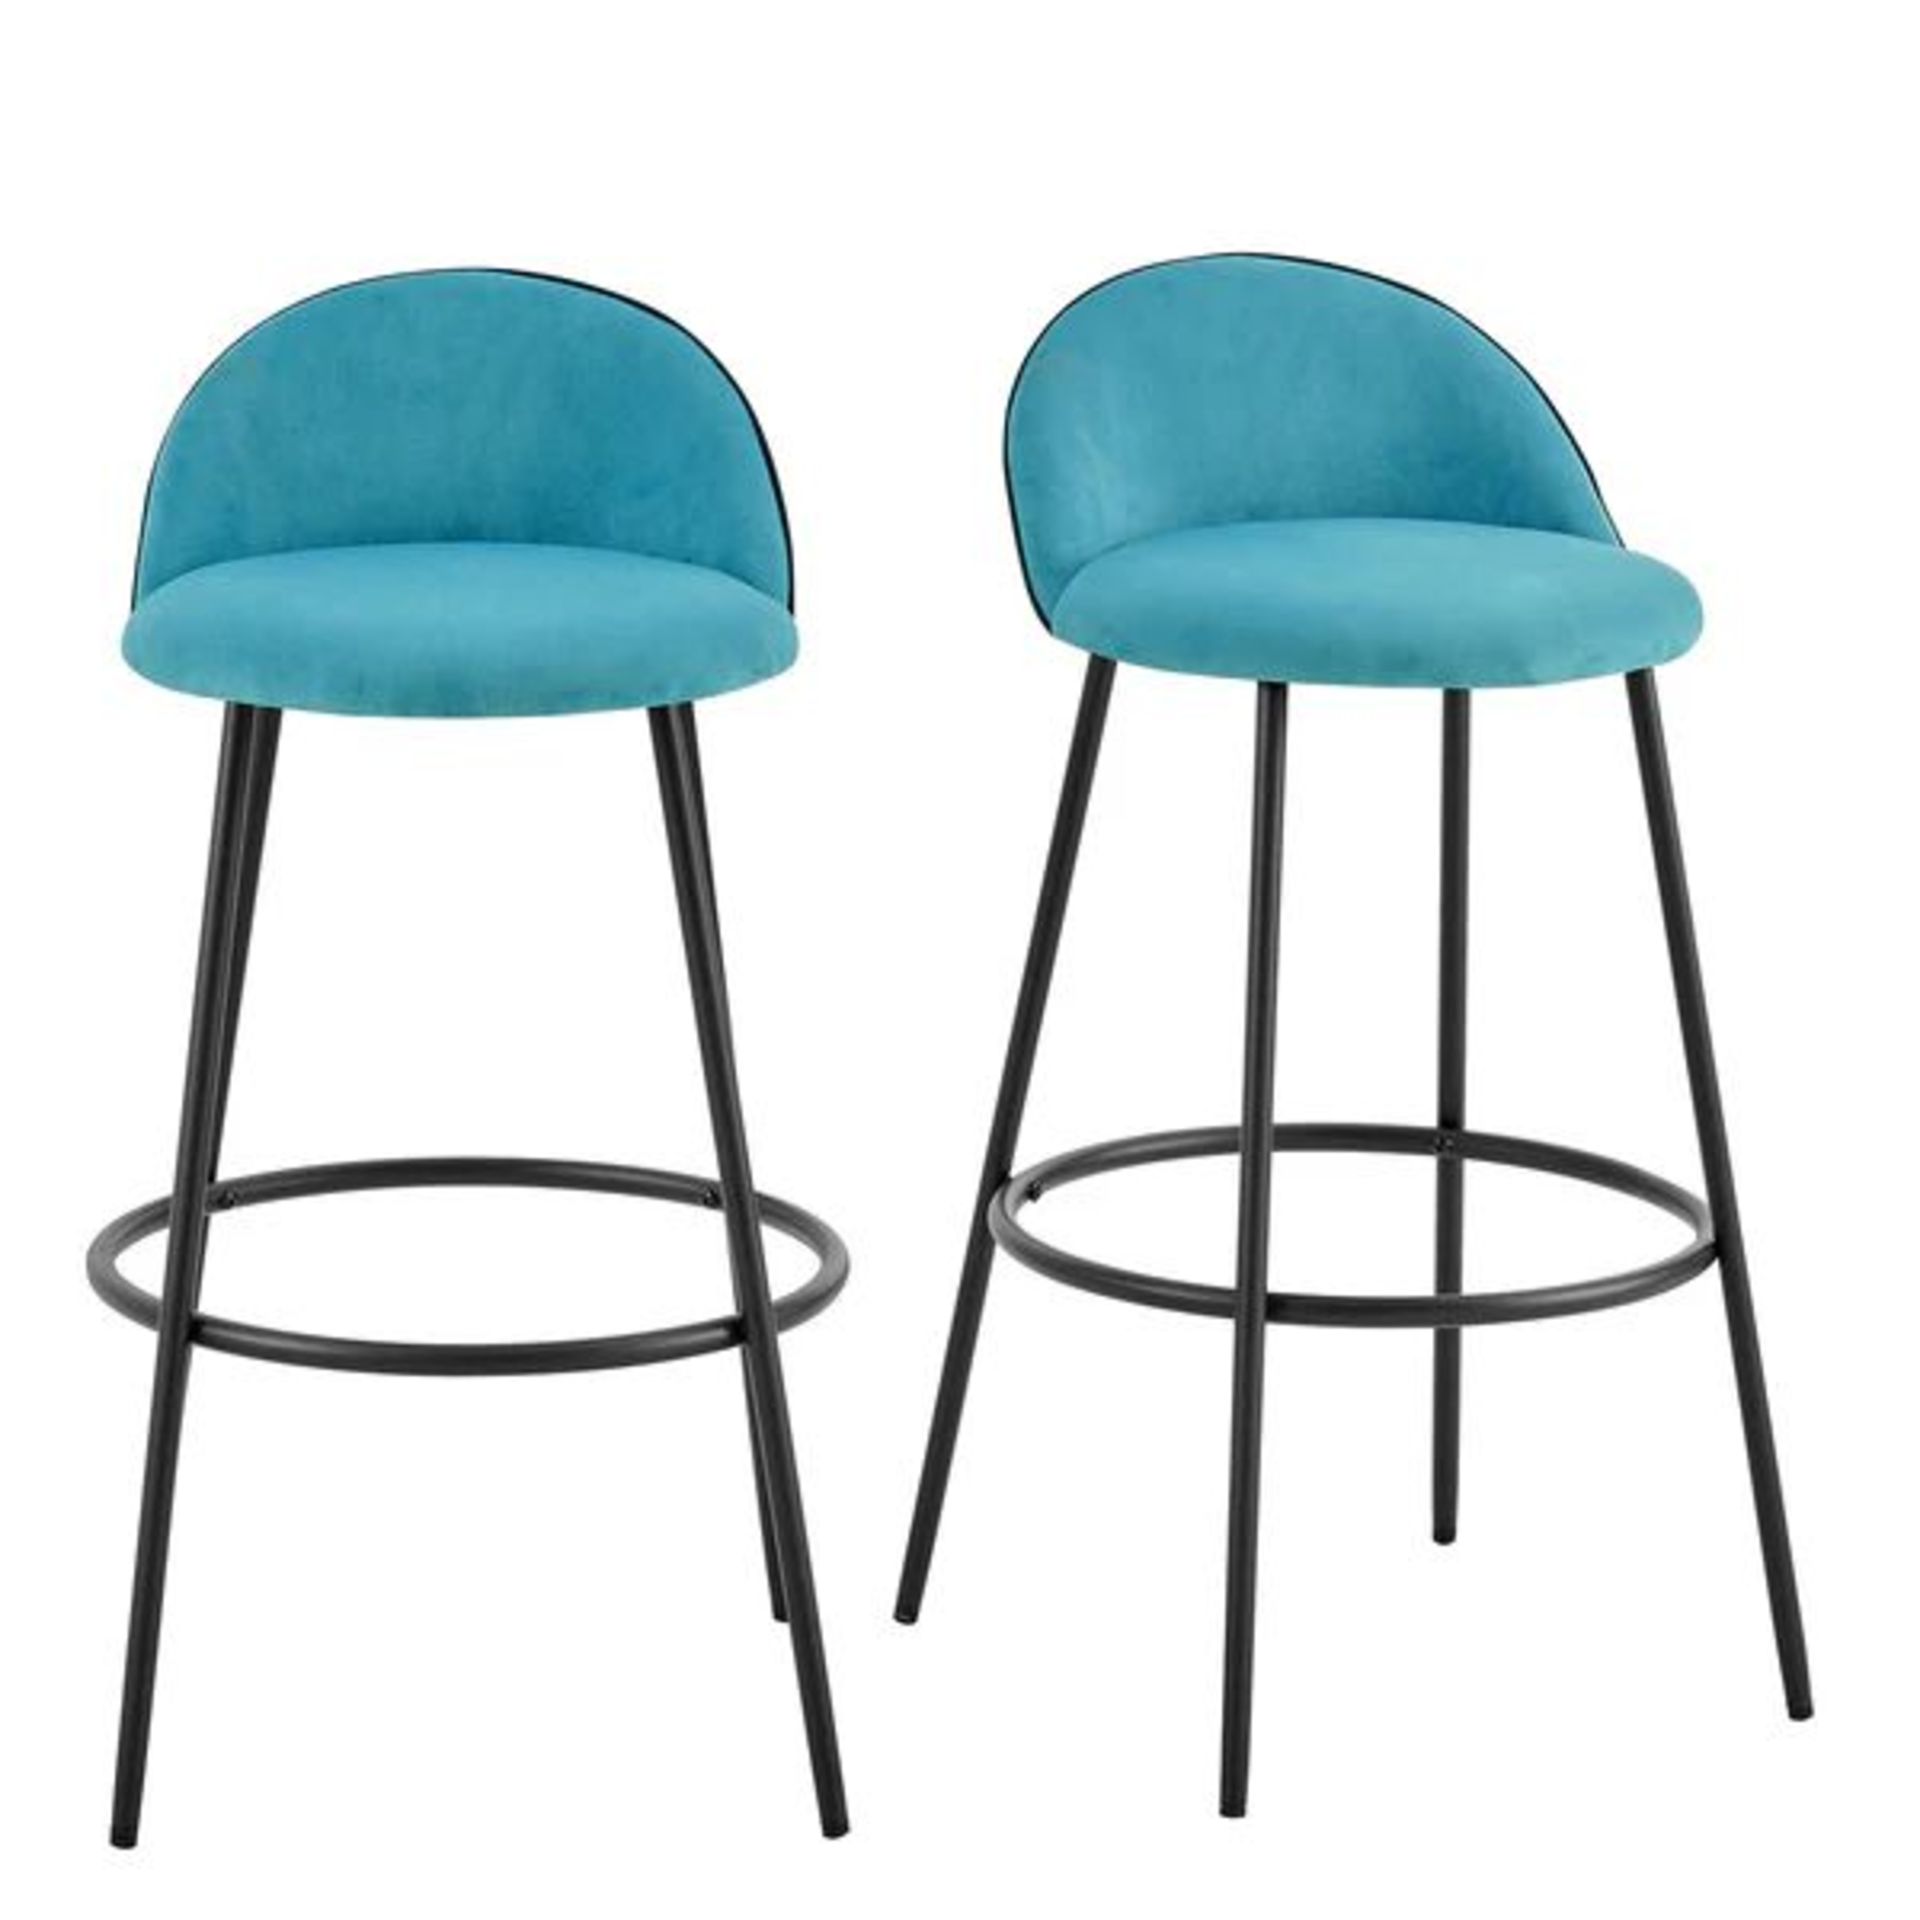 Barton Set of 2 Blue Velvet Upholstered Bar Stools with Contrast Piping. - R14. RRP £199.99. Our